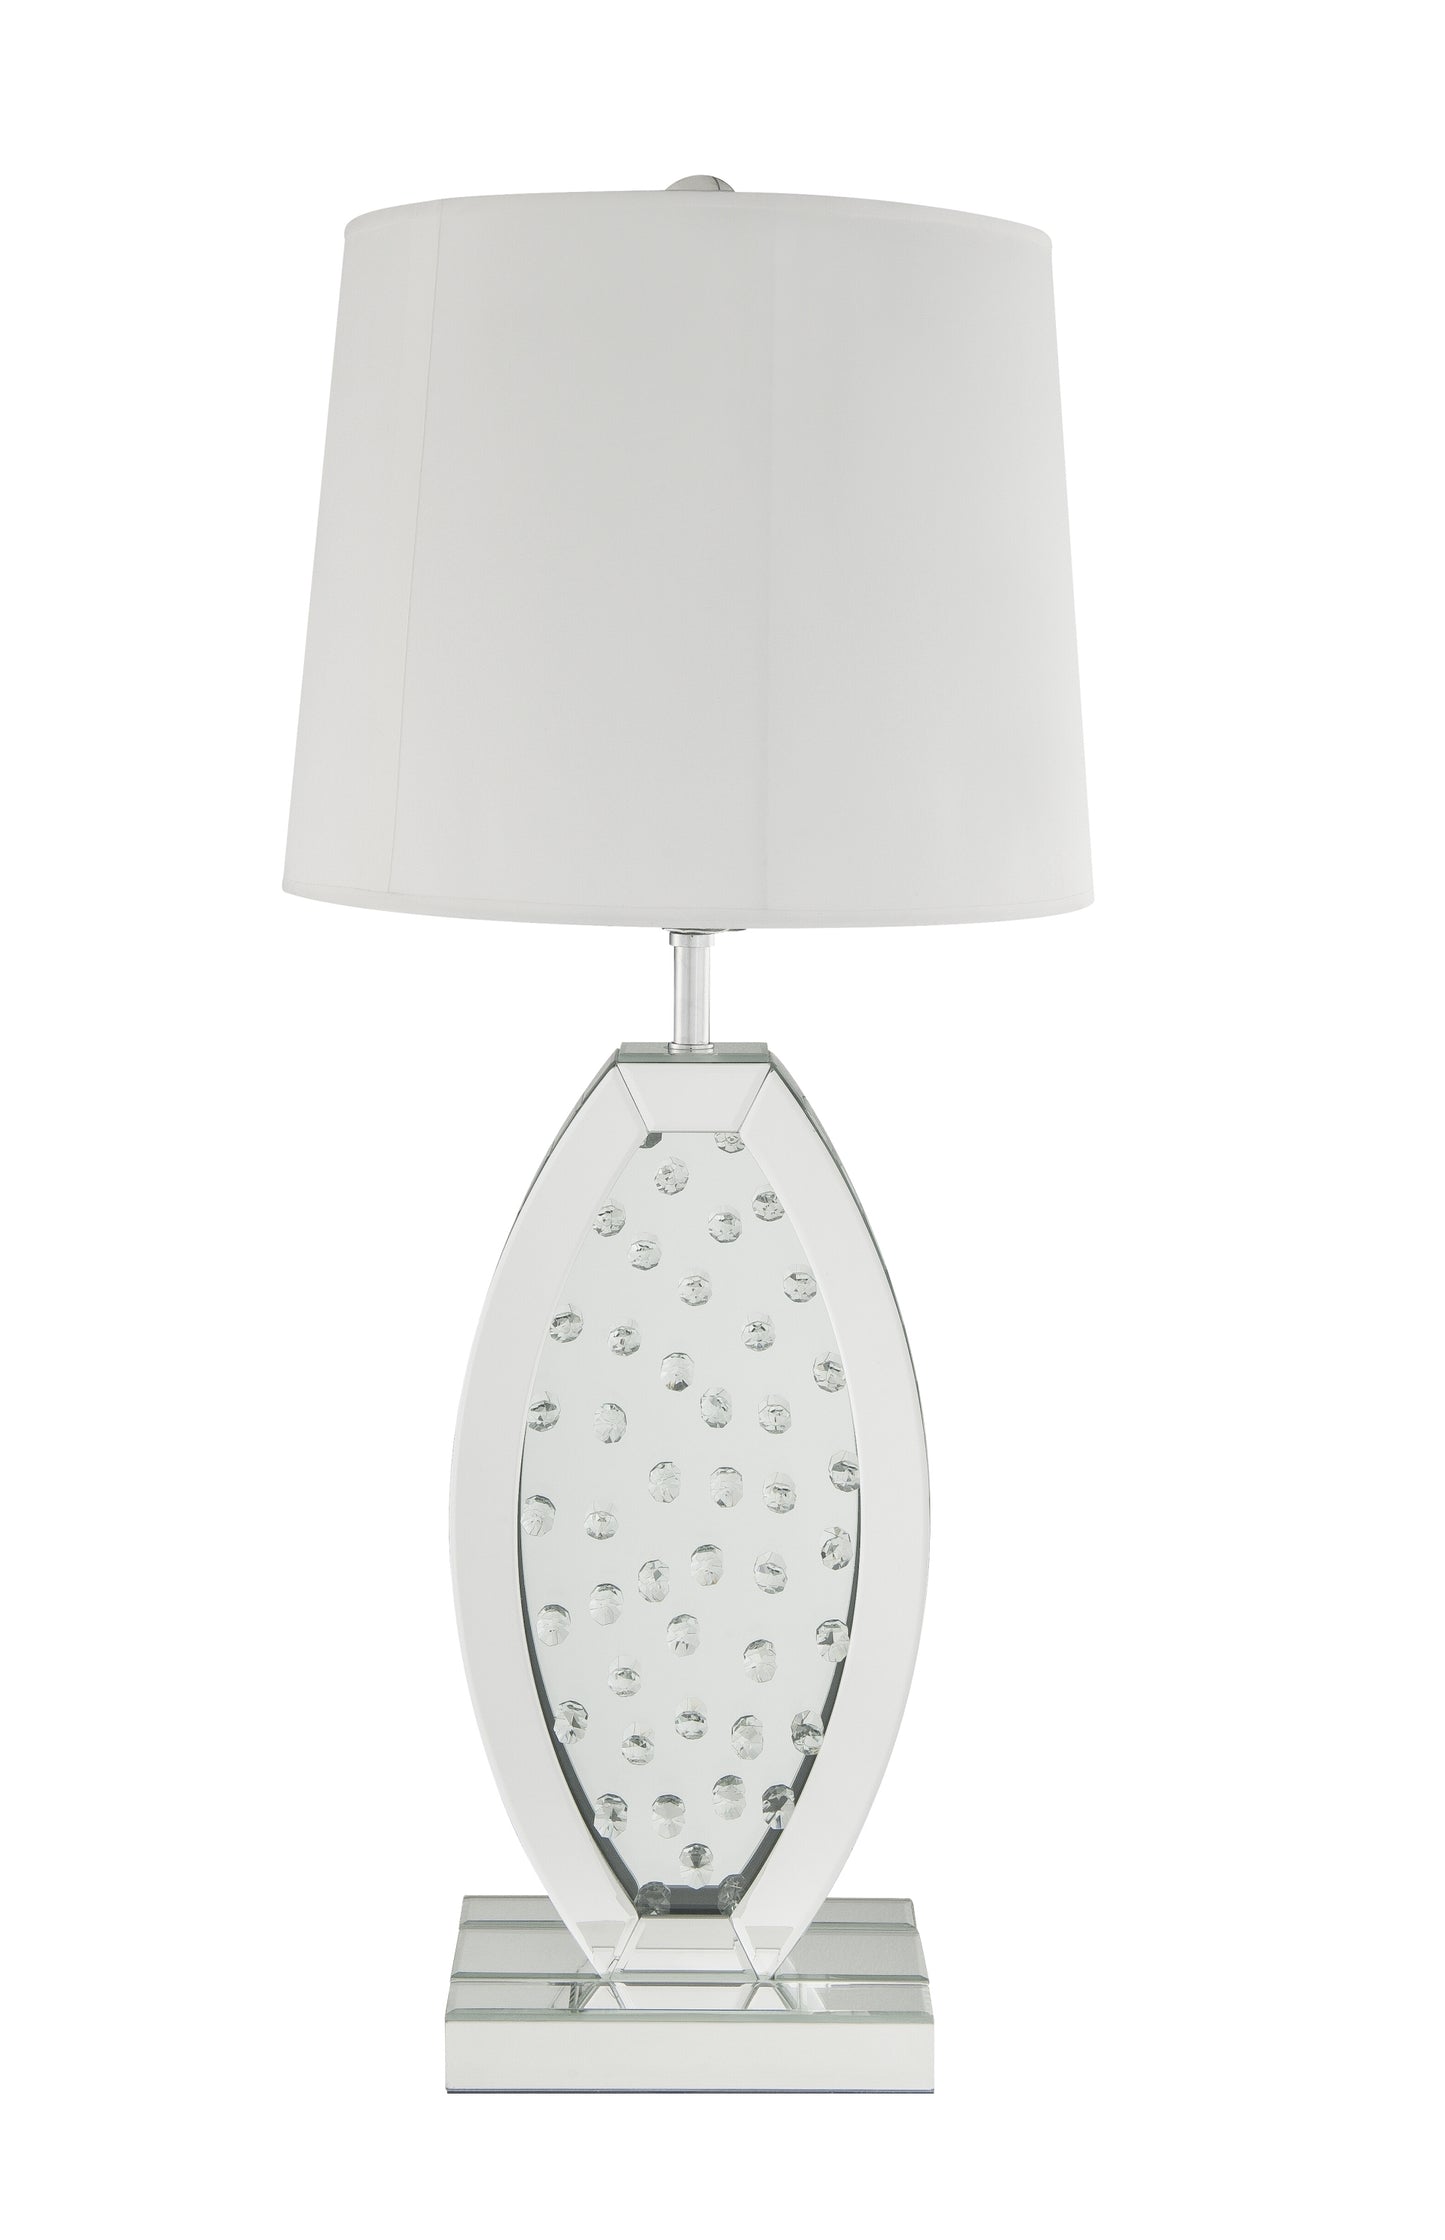 ACME Nysa Table Lamp in Mirrored & Faux Crystals